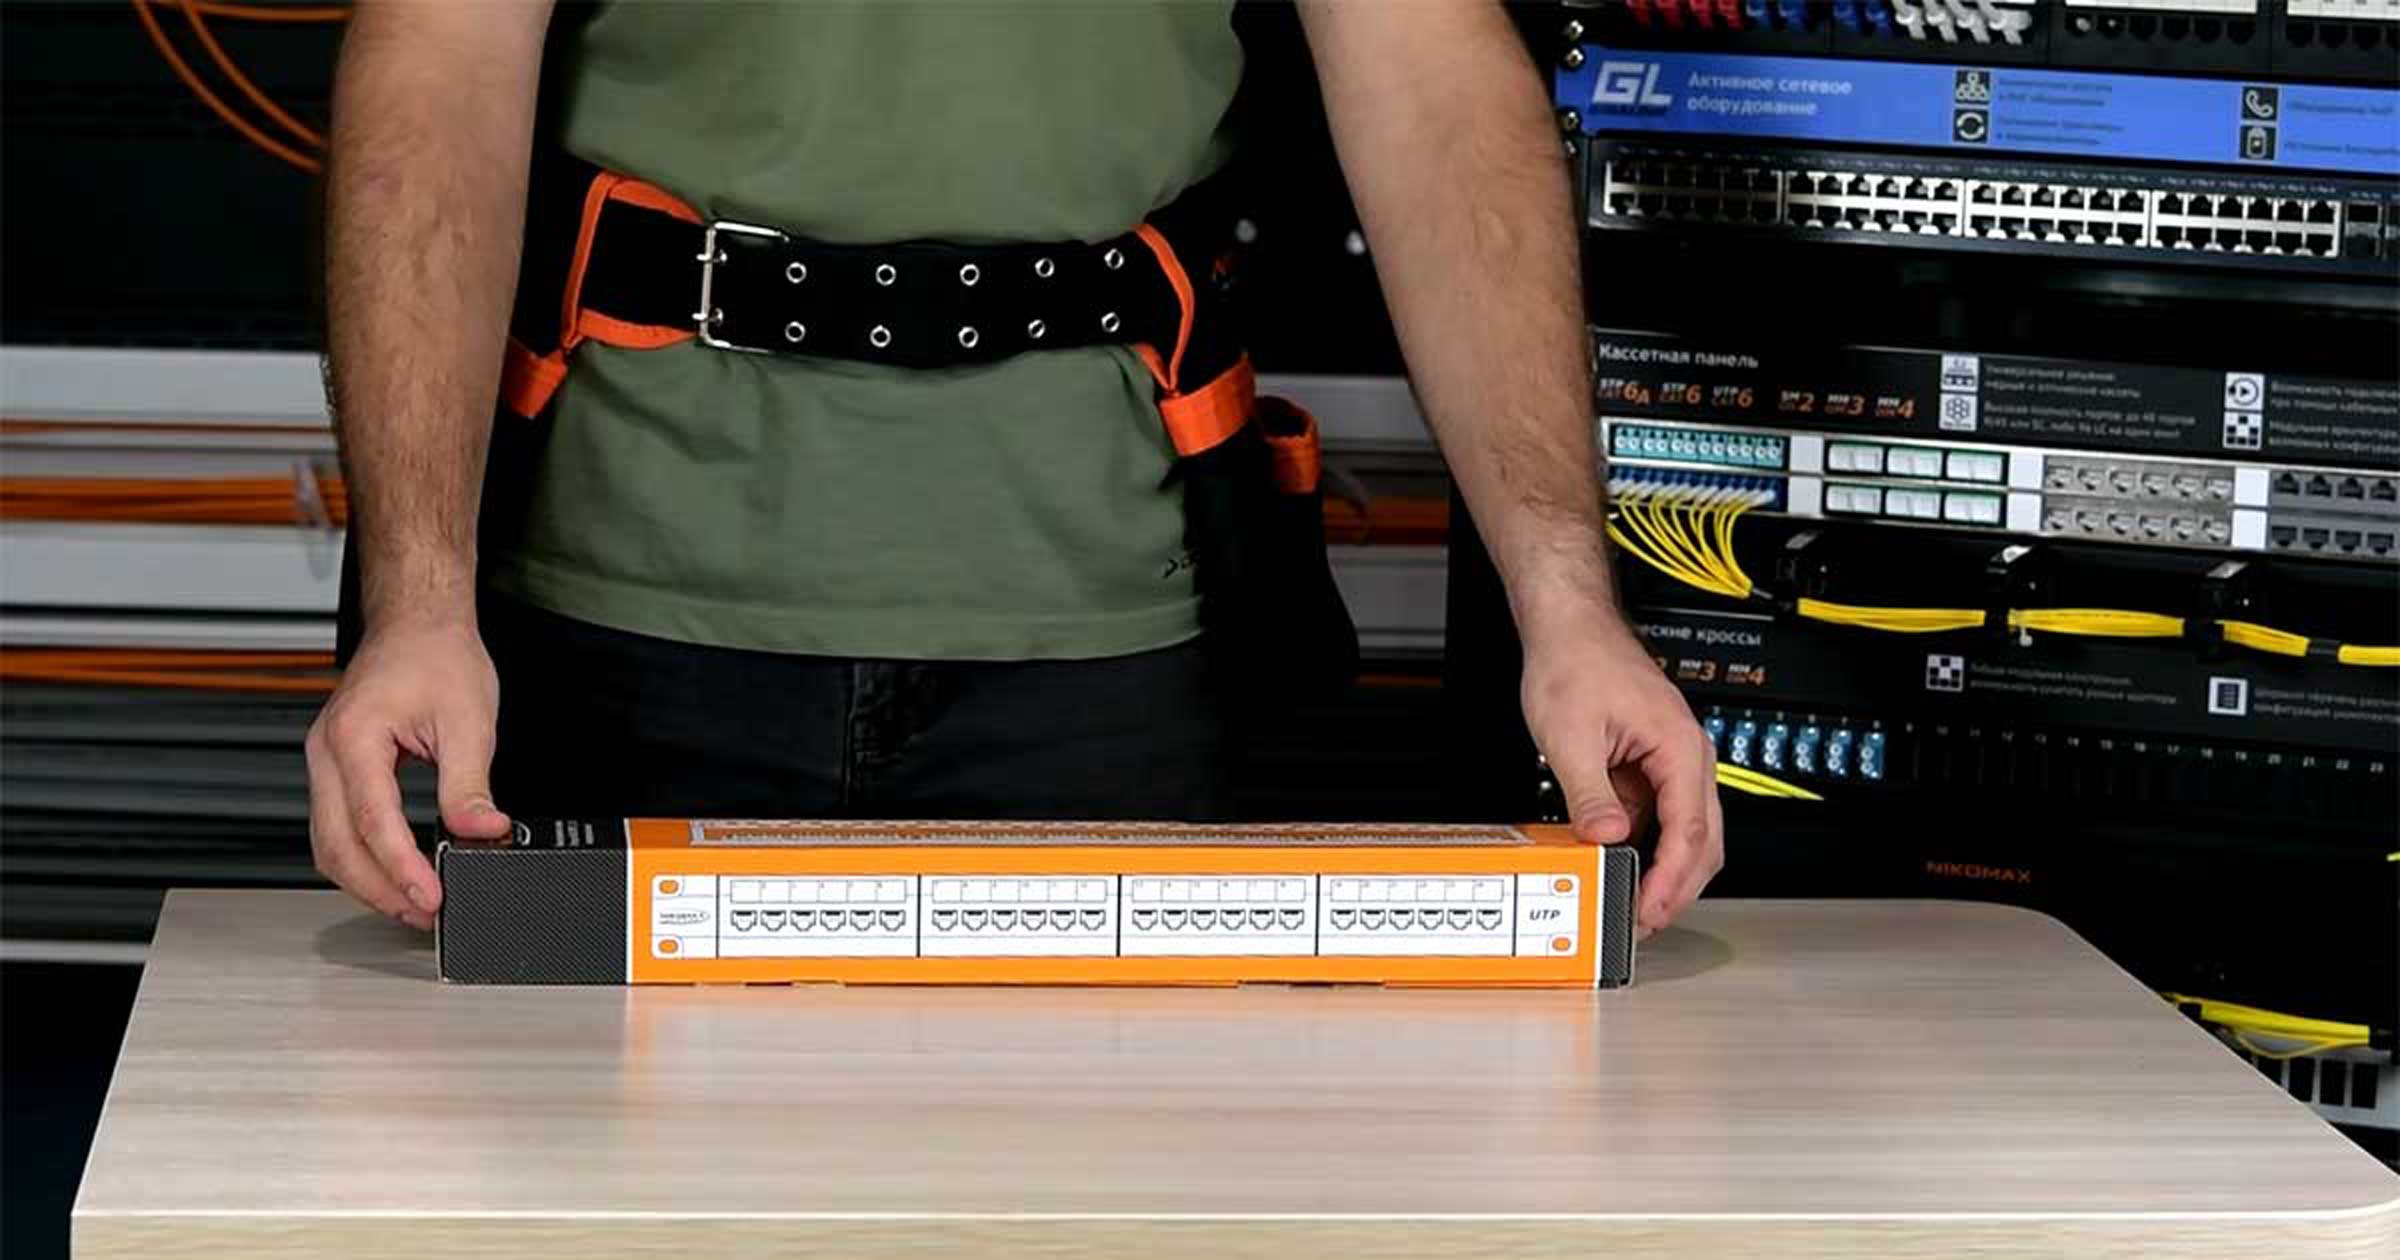 How to terminate a NIKOMAX standard patch panel?